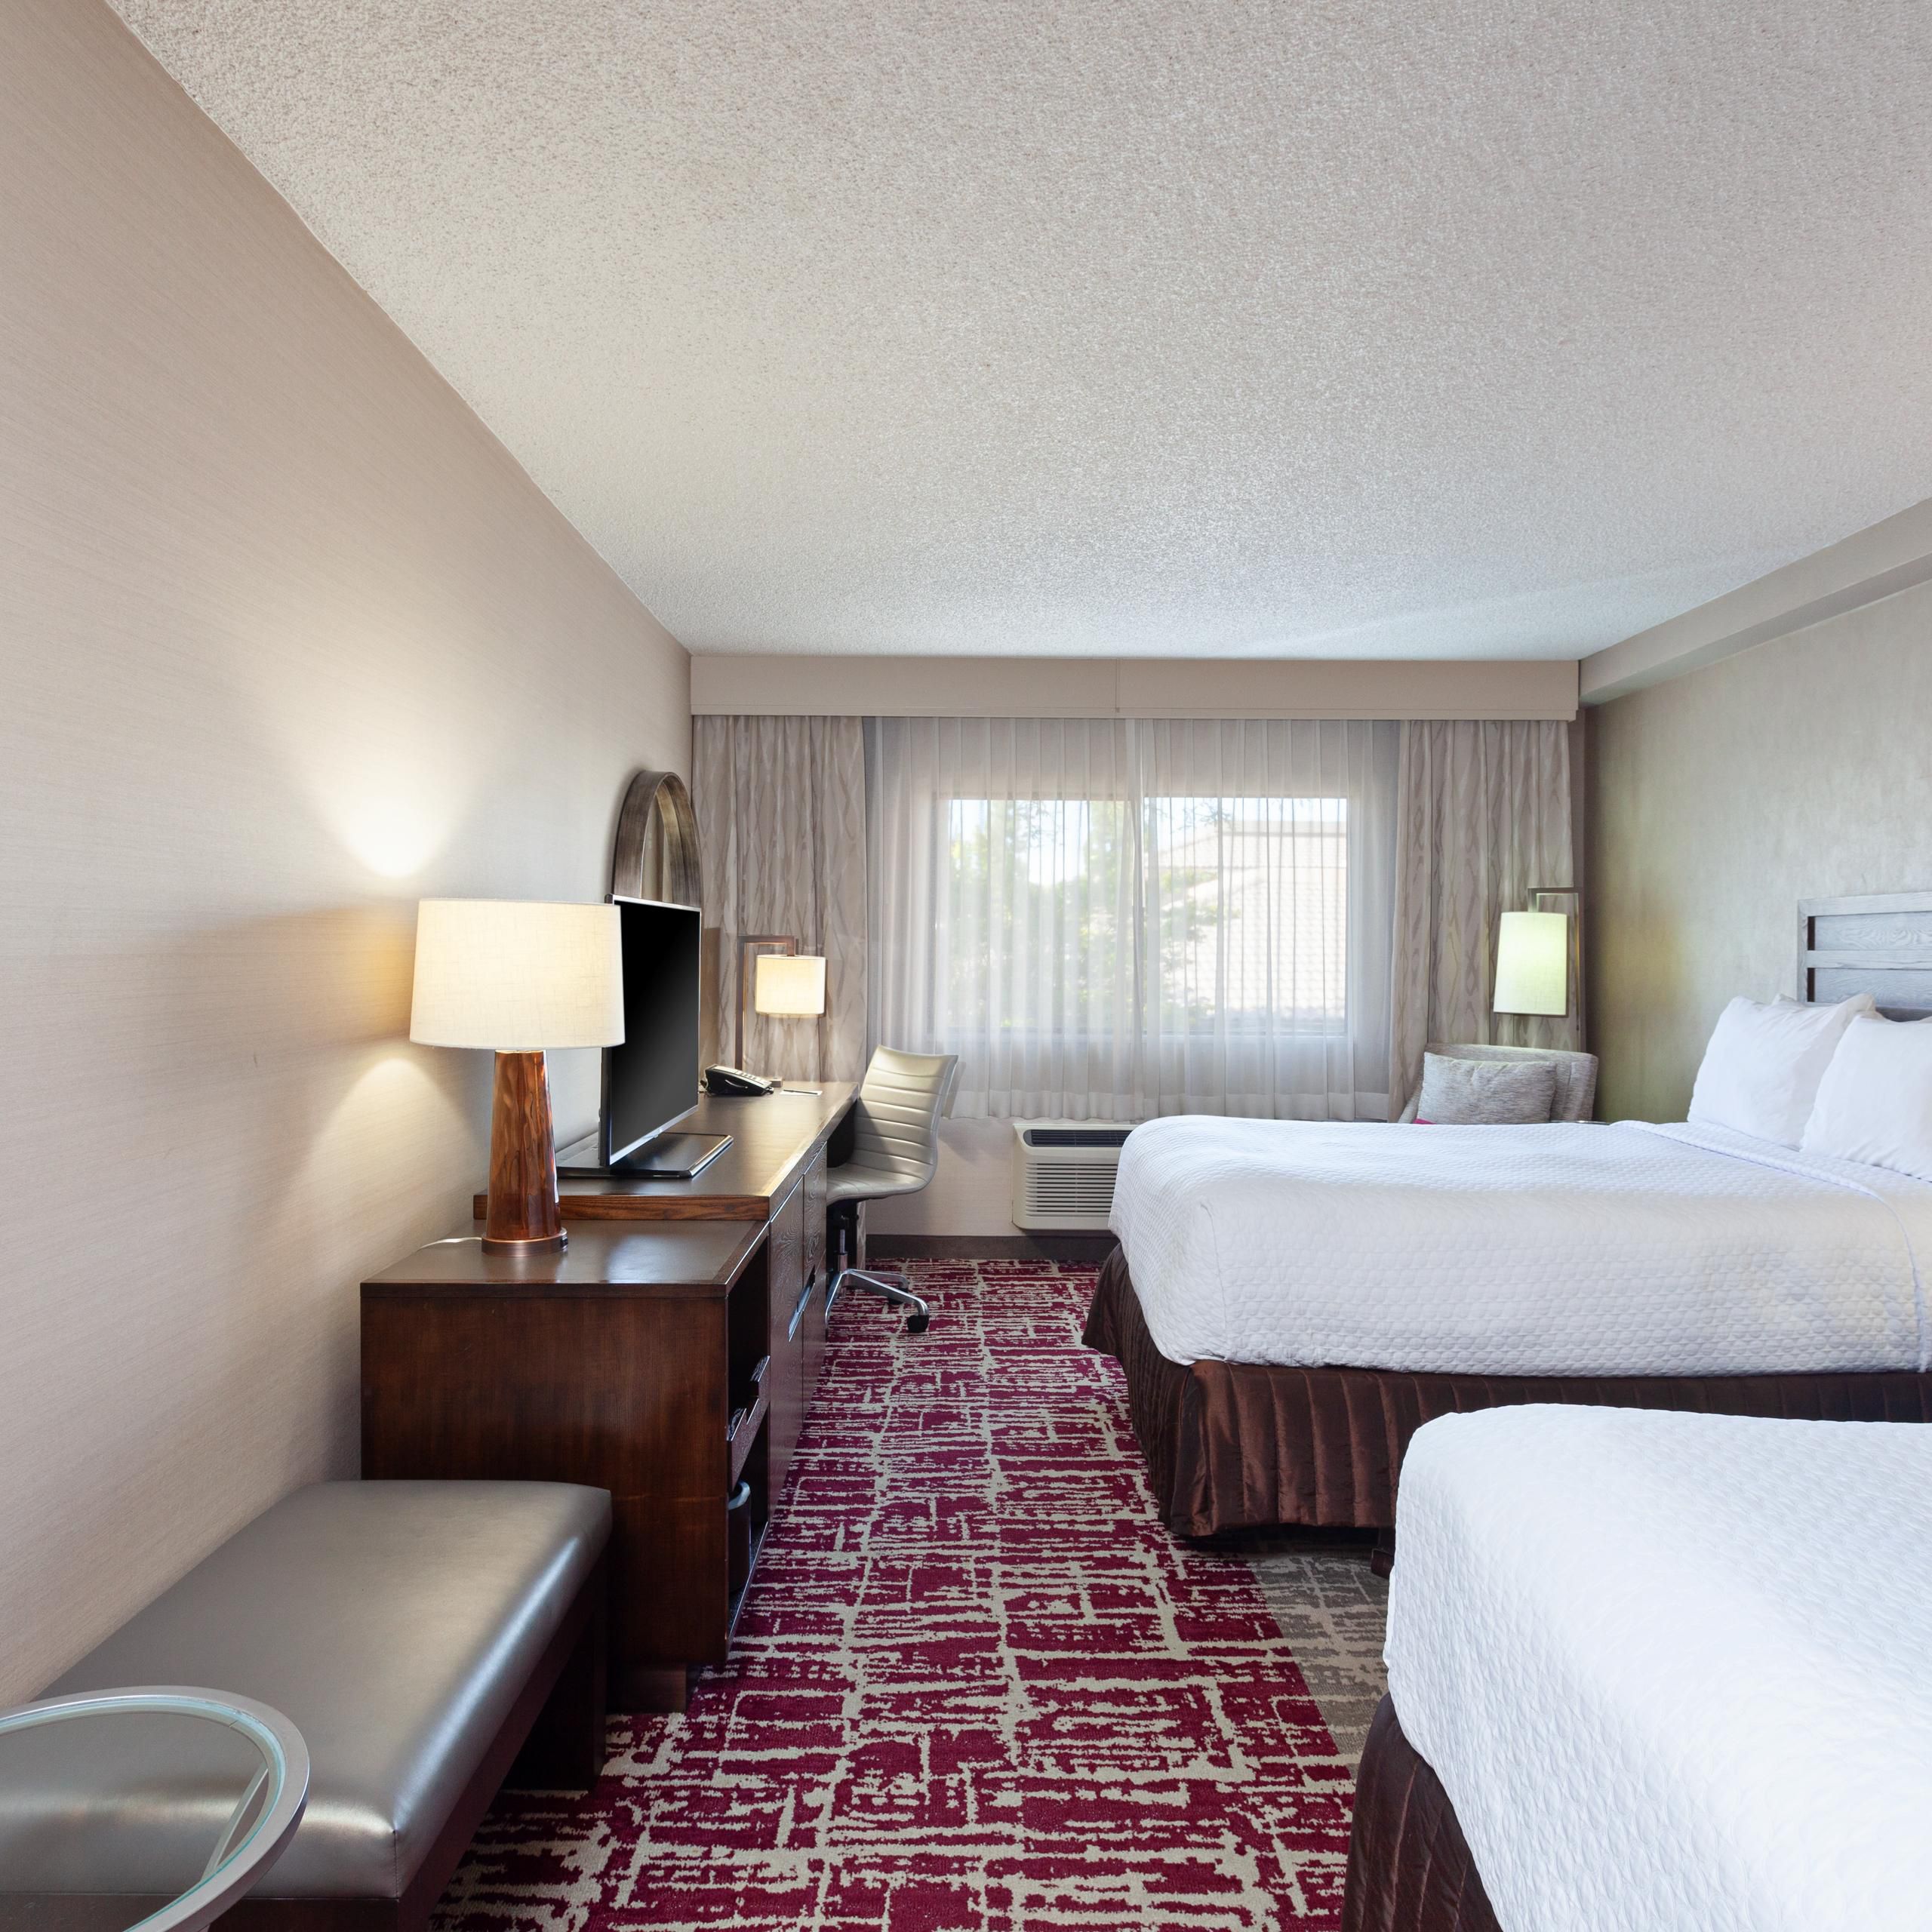 Indulge yourself in our warm, welcoming double bed room